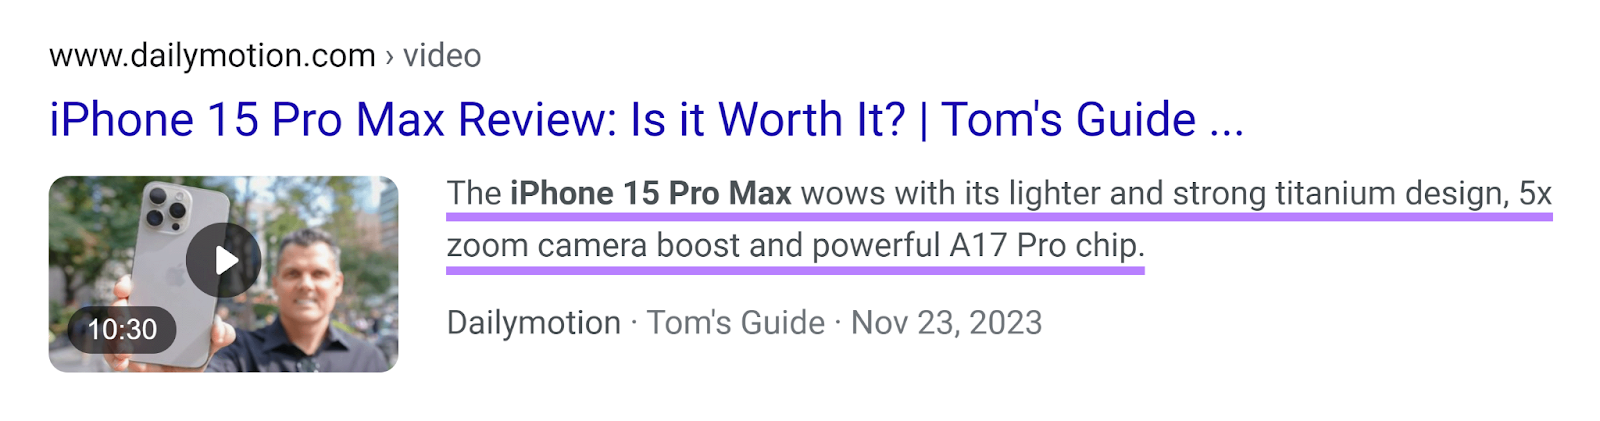 Google Search result for iPhone 15 Pro Max Review showing optimized description.